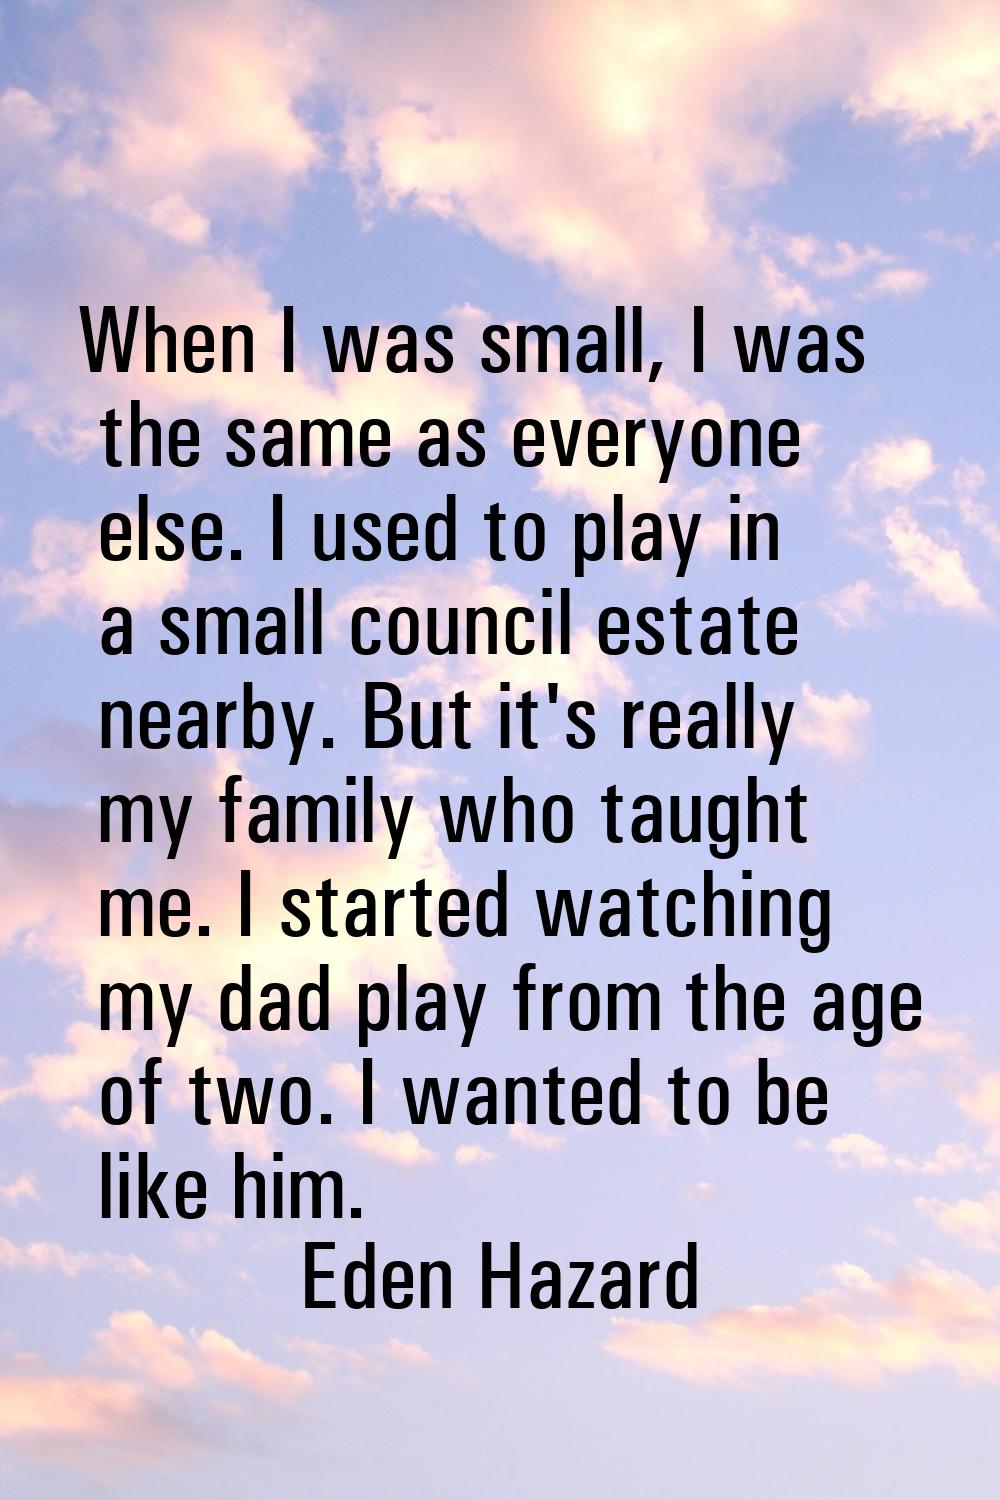 When I was small, I was the same as everyone else. I used to play in a small council estate nearby.